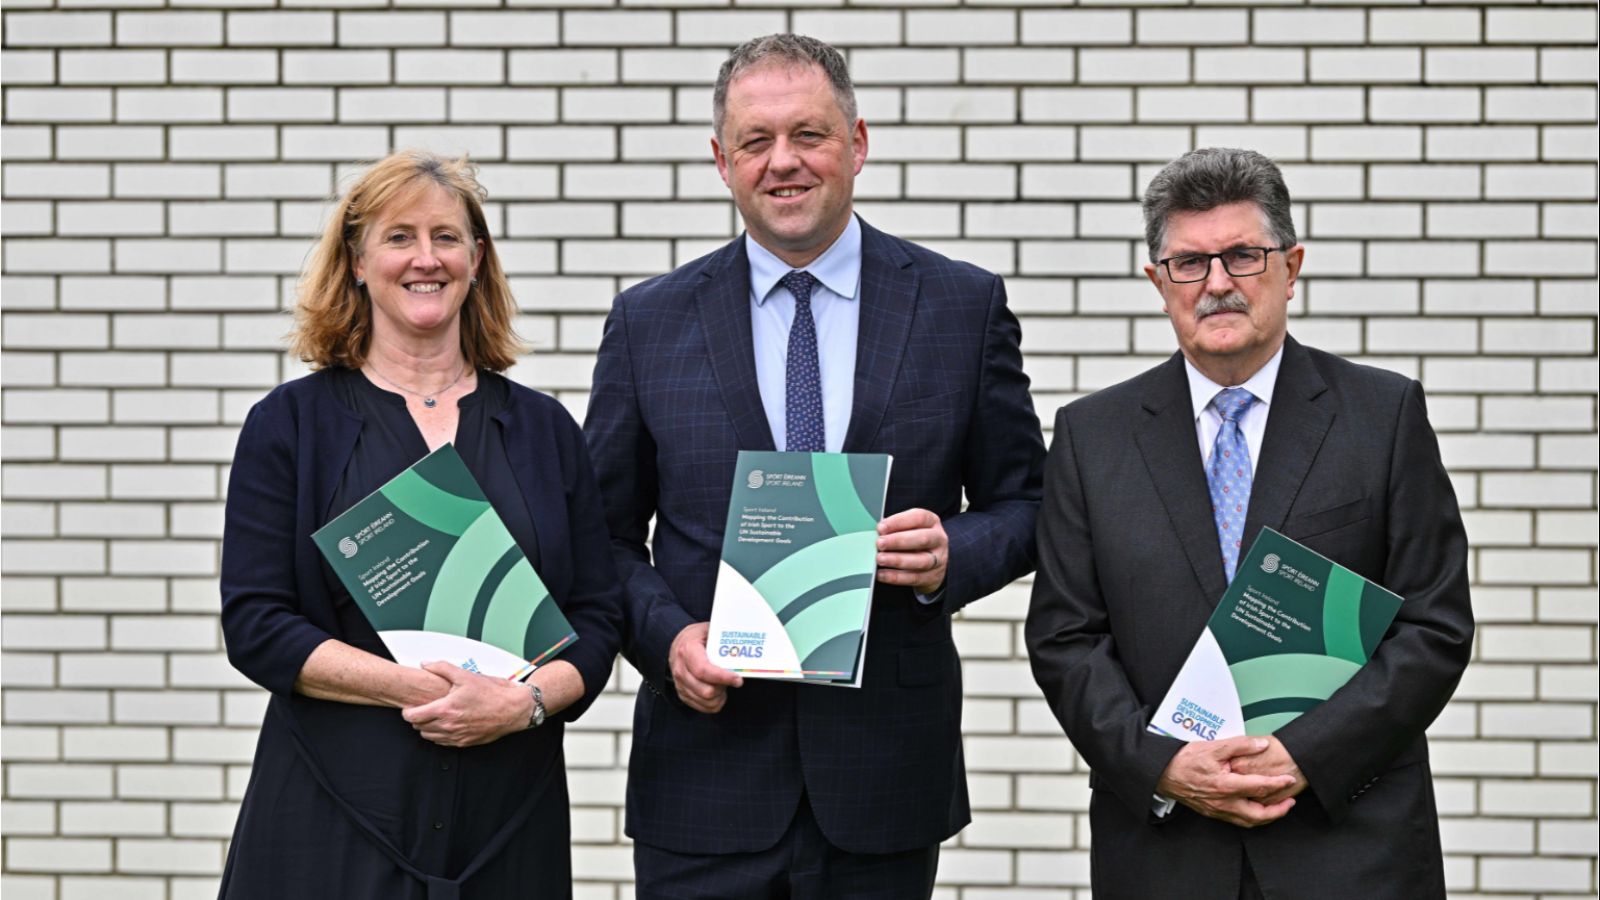 At the launch of the Sport Ireland Irish Sport Monitor 2023 report were Dr Úna May, CEO of Sport Ireland, Minister of State for Sport, Physical Education and the Gaeltacht, Thomas Byrne TD, and John Foley, Chairperson of Sport Ireland. The report shows nearly two million adults in Ireland participate in sport every week - more than ever before.  See the Sport Ireland press release which issued today. To request a copy of the press release contact media@sportireland.ie